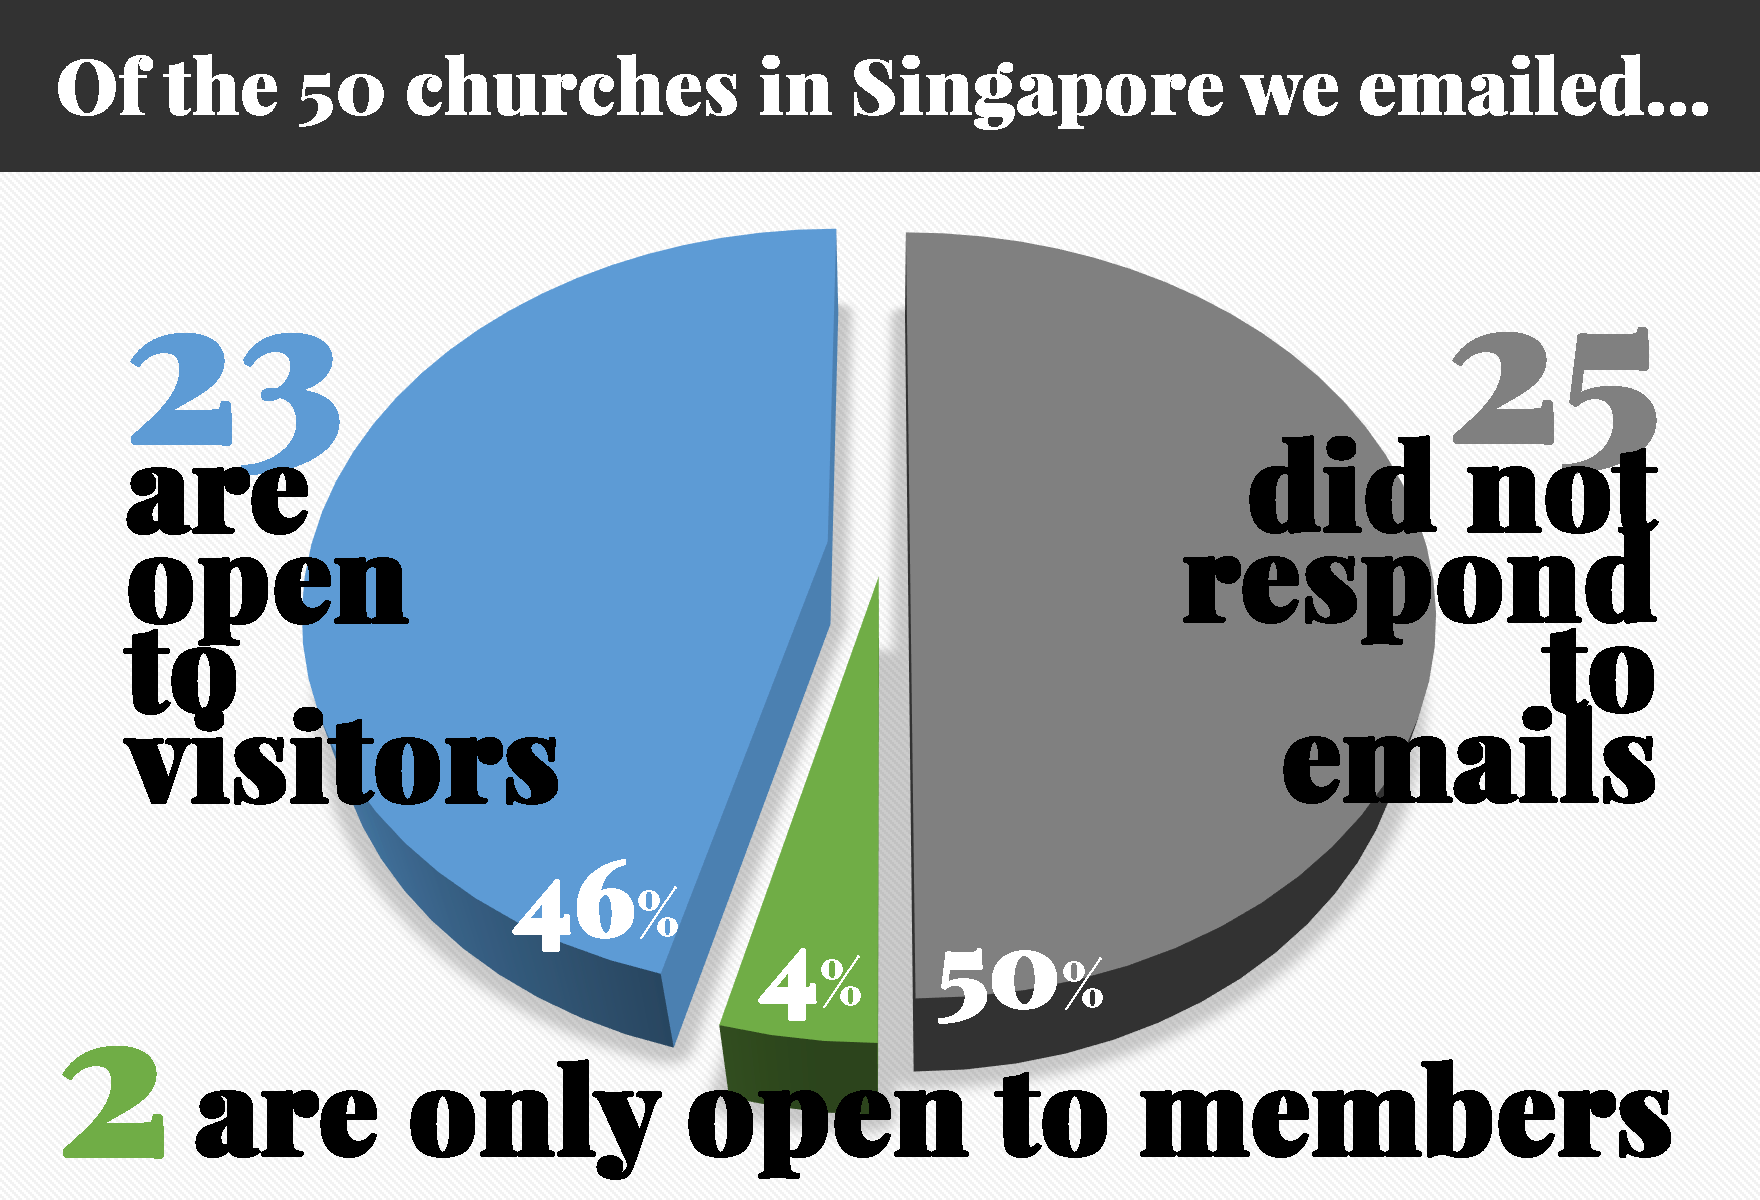 Survey of 50 churches on visitors